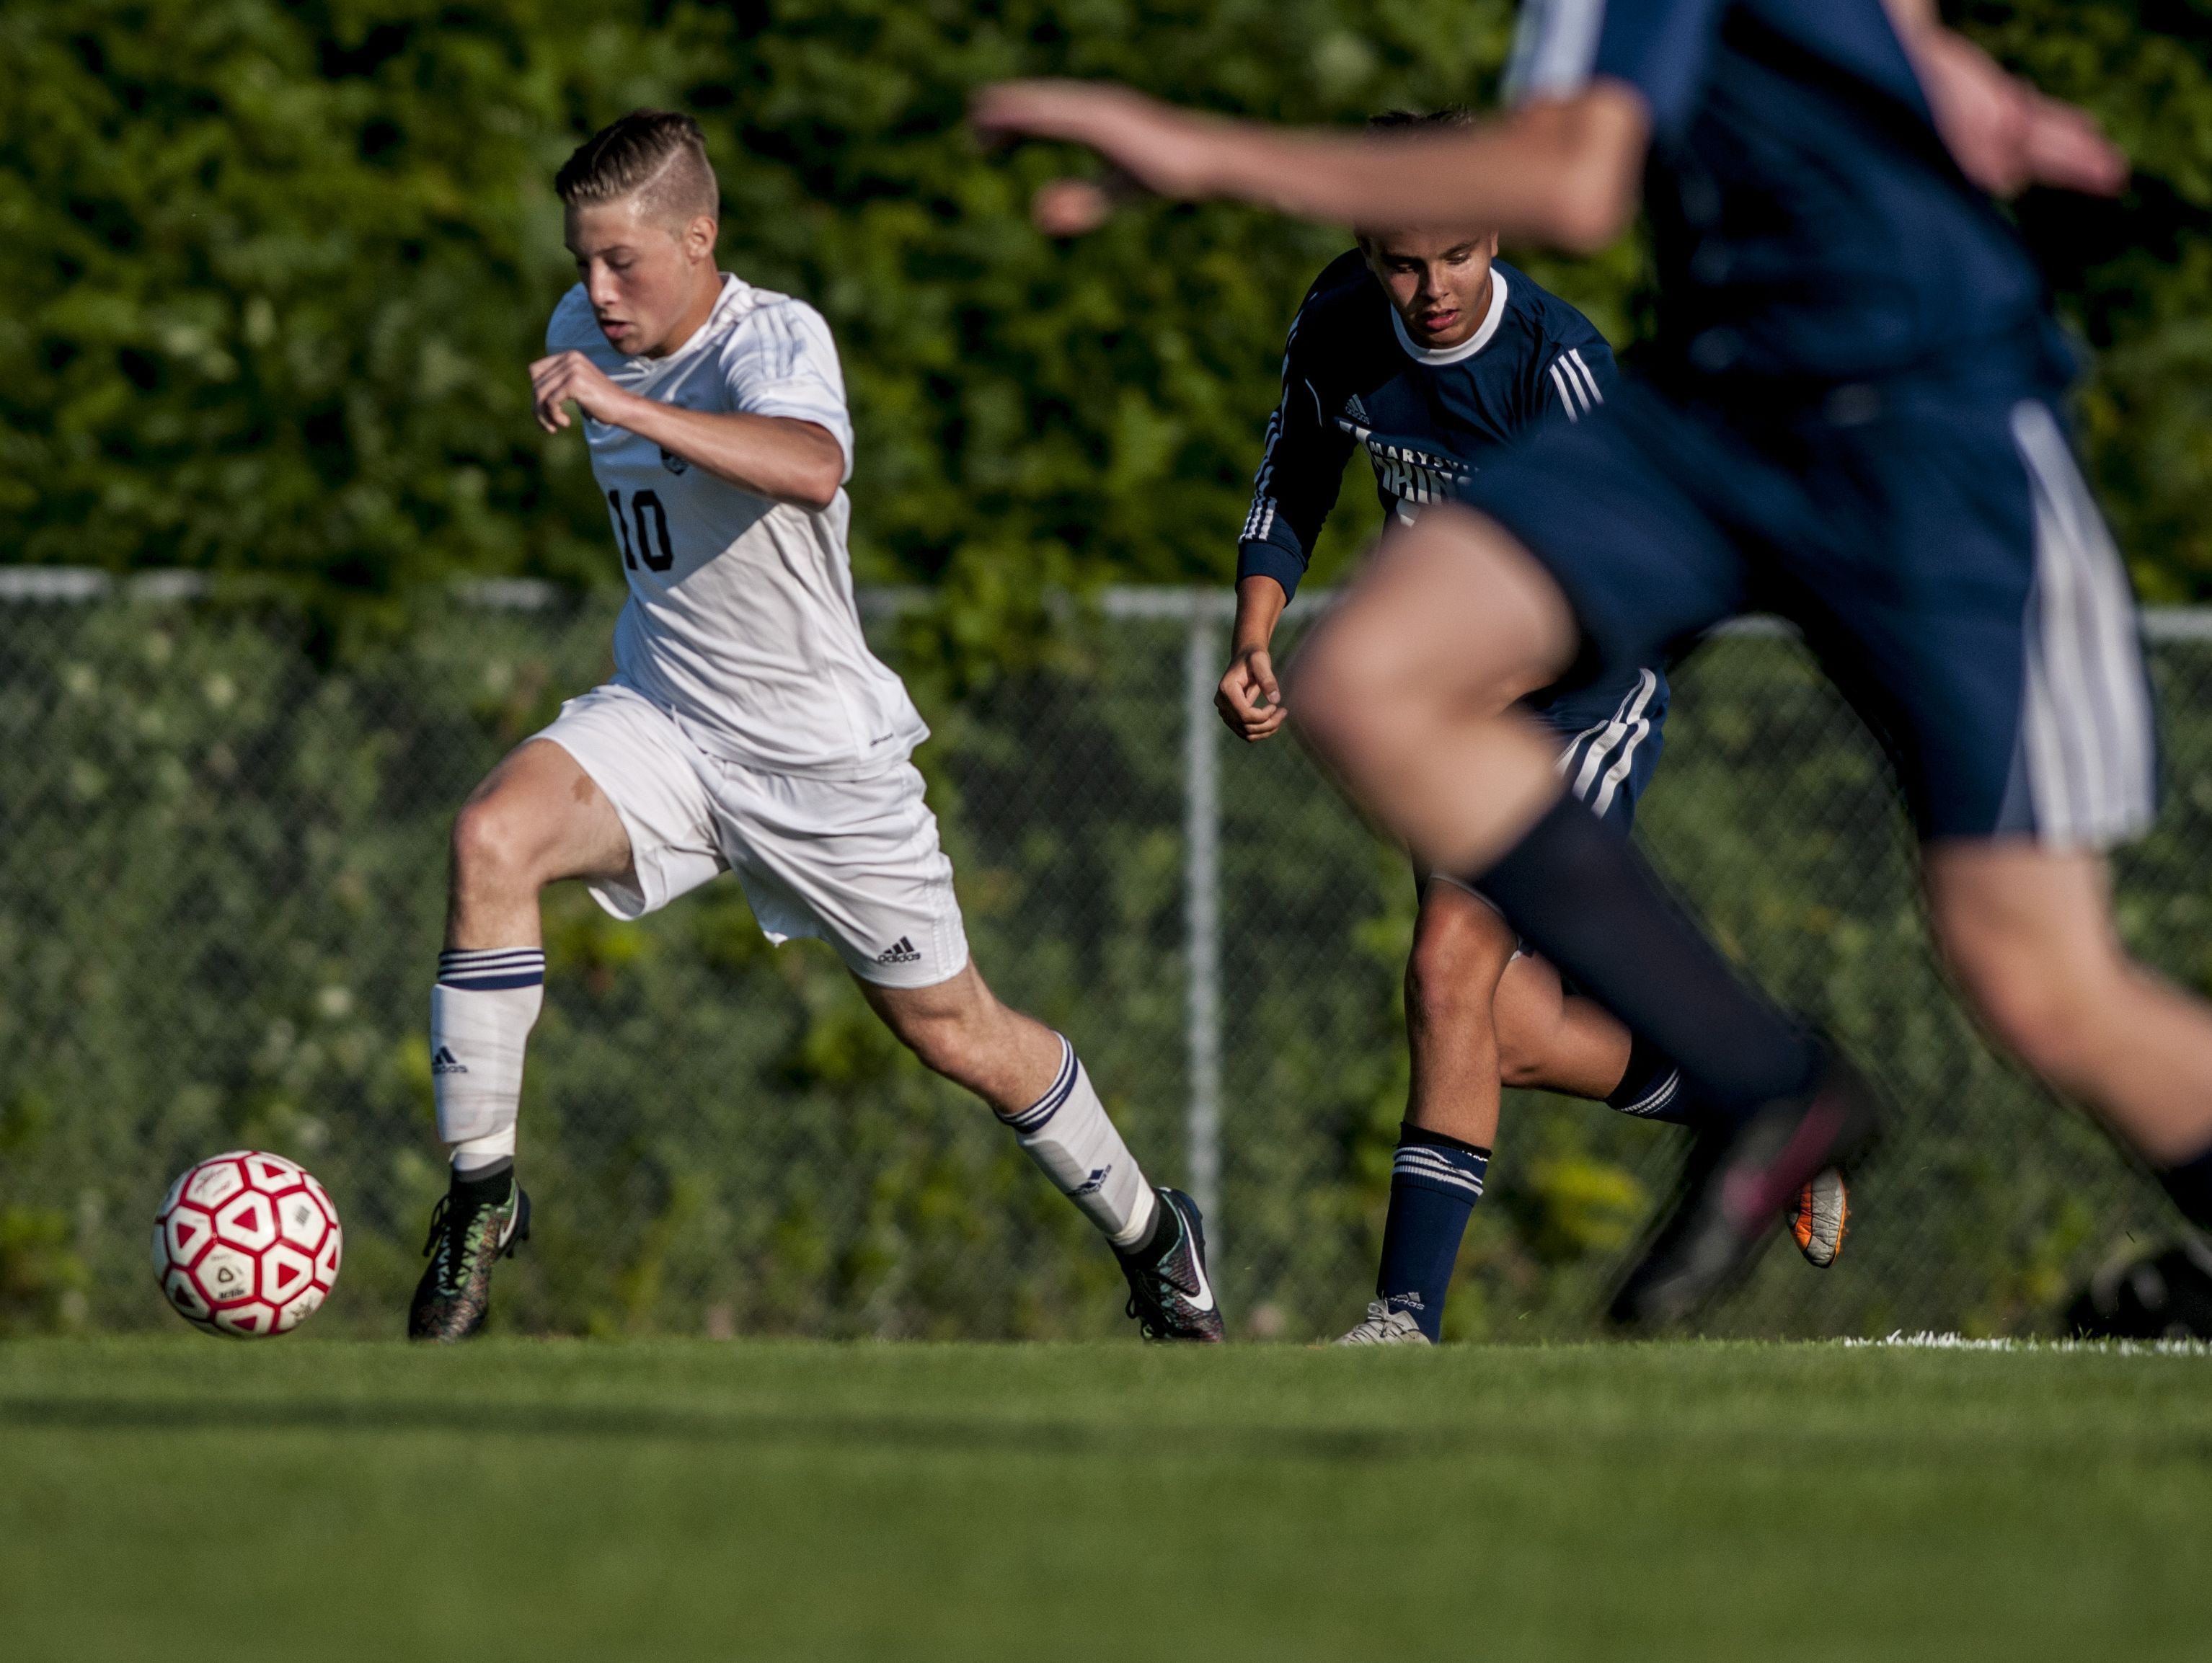 Port Huron's Marko Nedeljkovic breaks away with the ball during a soccer game Wednesday, August 31, 2016 at Port Huron Northern High School.